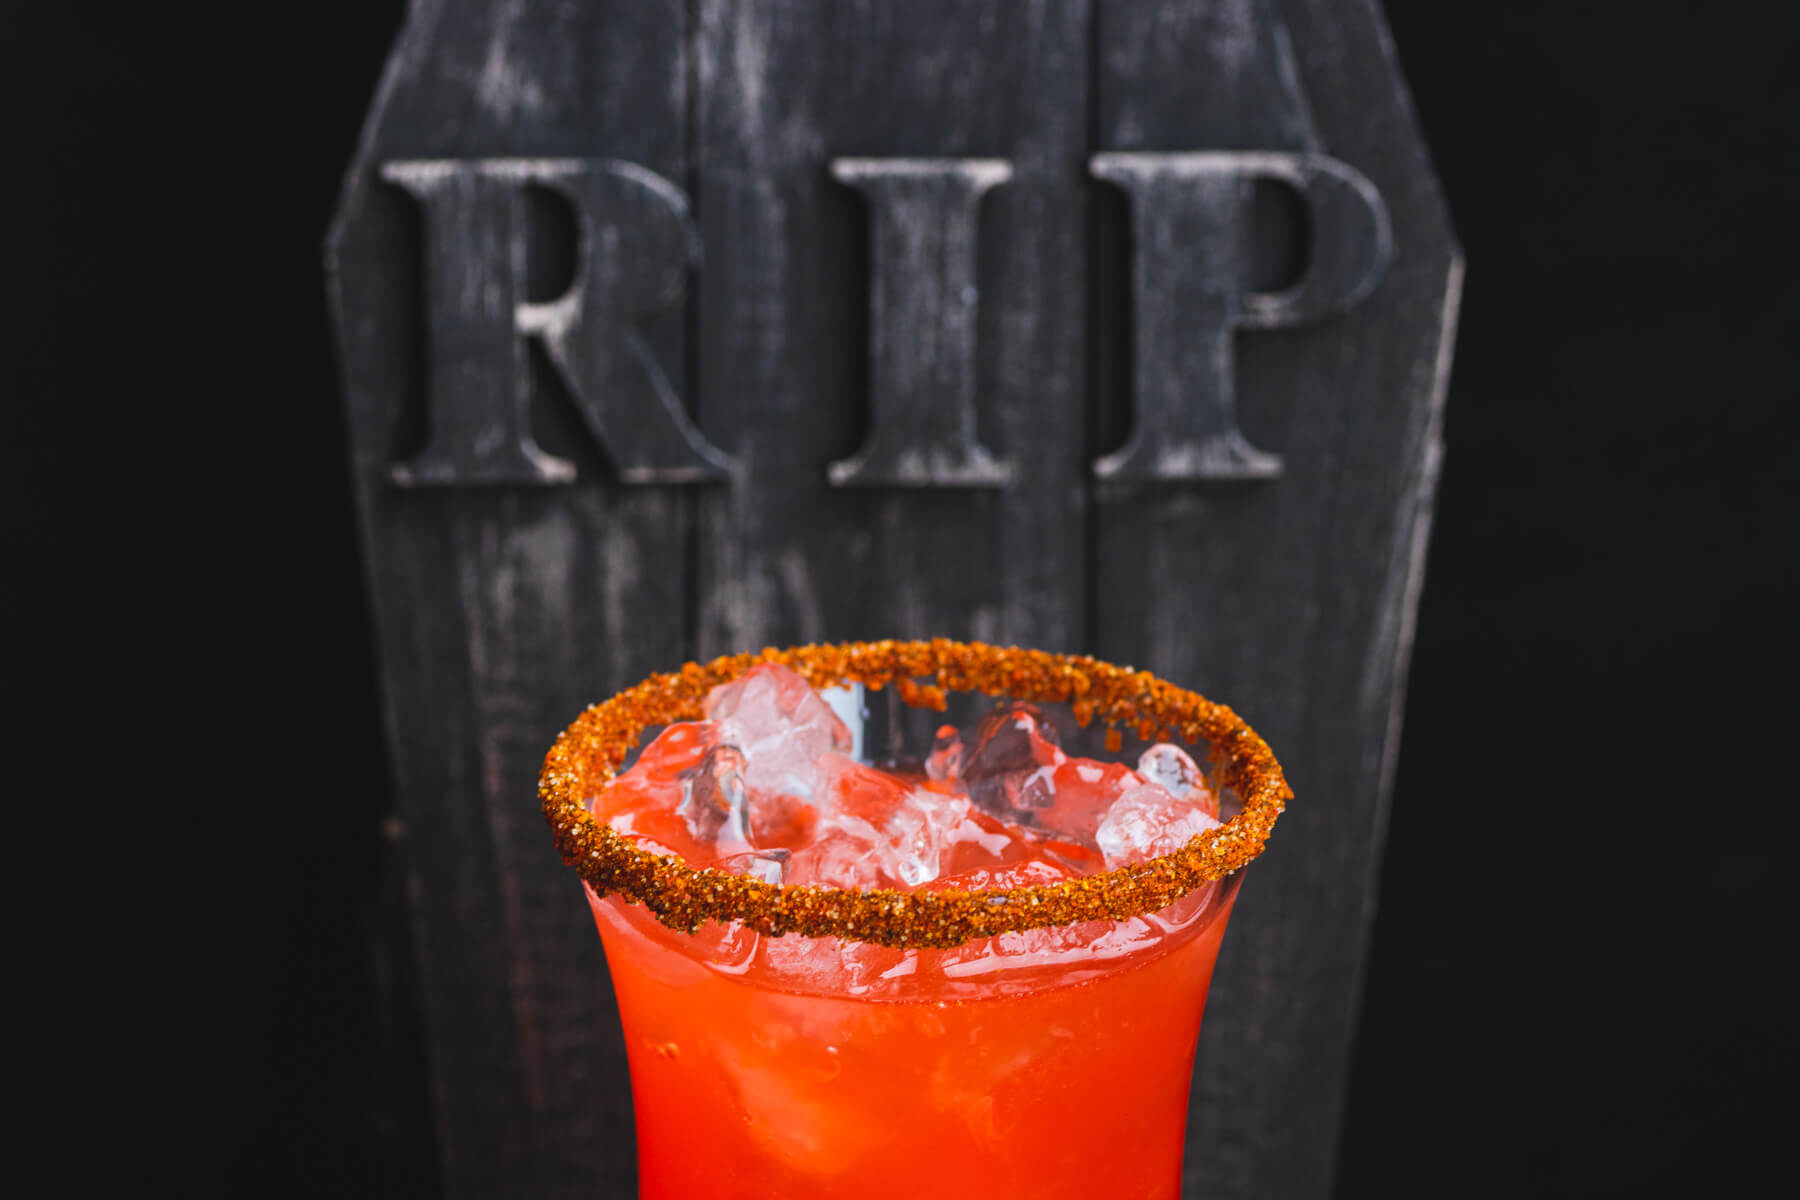 Close up of the Tajin rim on a hurricane glass containing a layered blood red Vampiro Cocktail in front of a creepy tombstone.